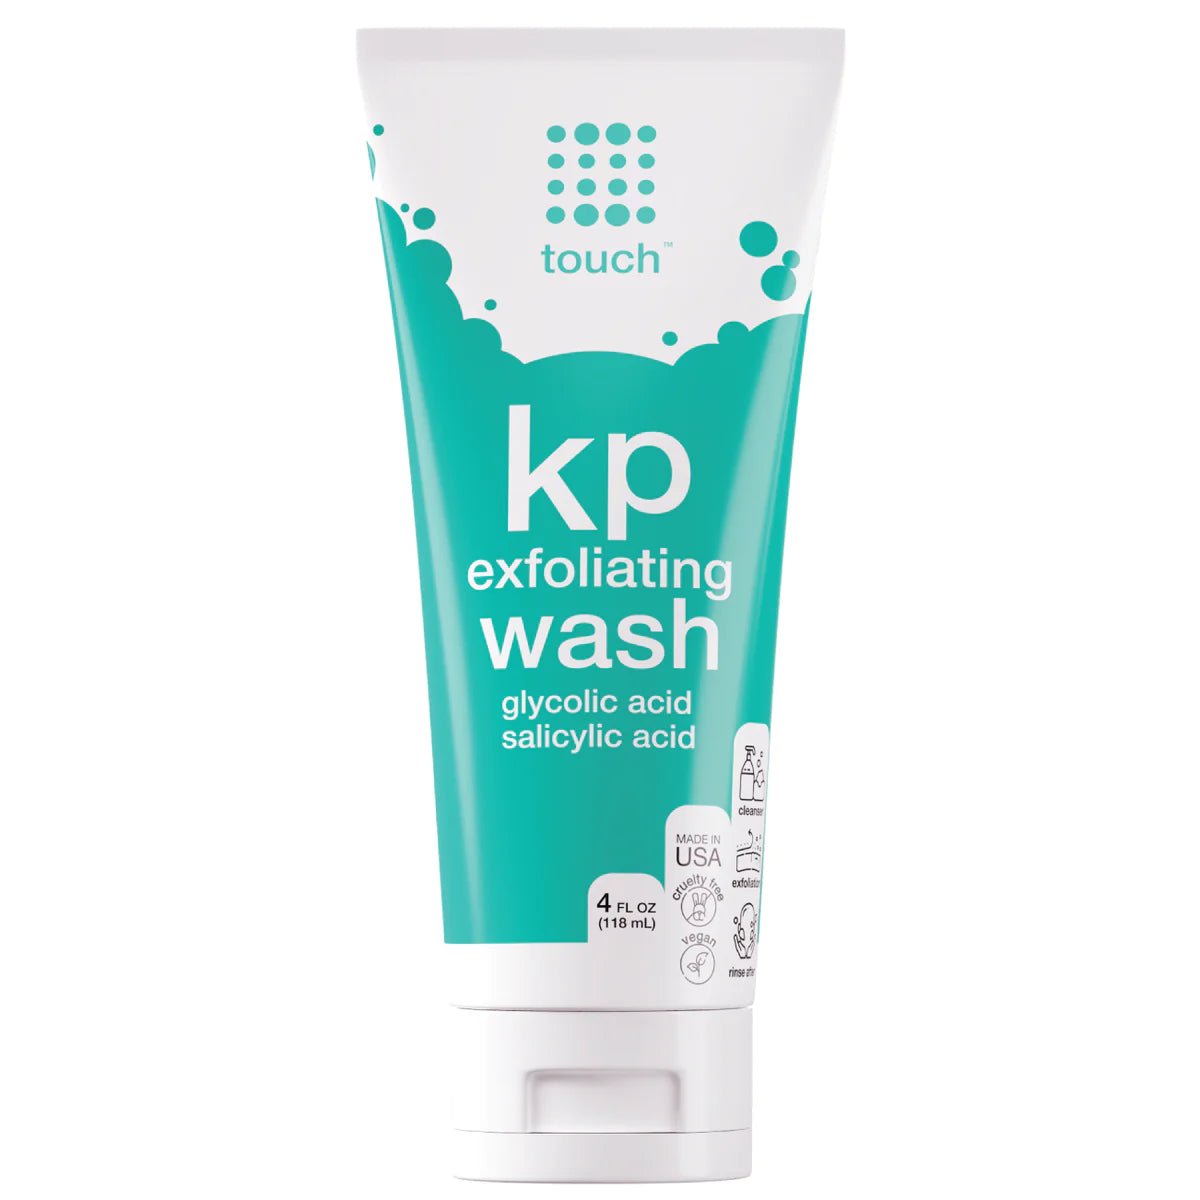 Touch Kp Exfoliating Wash 118ml